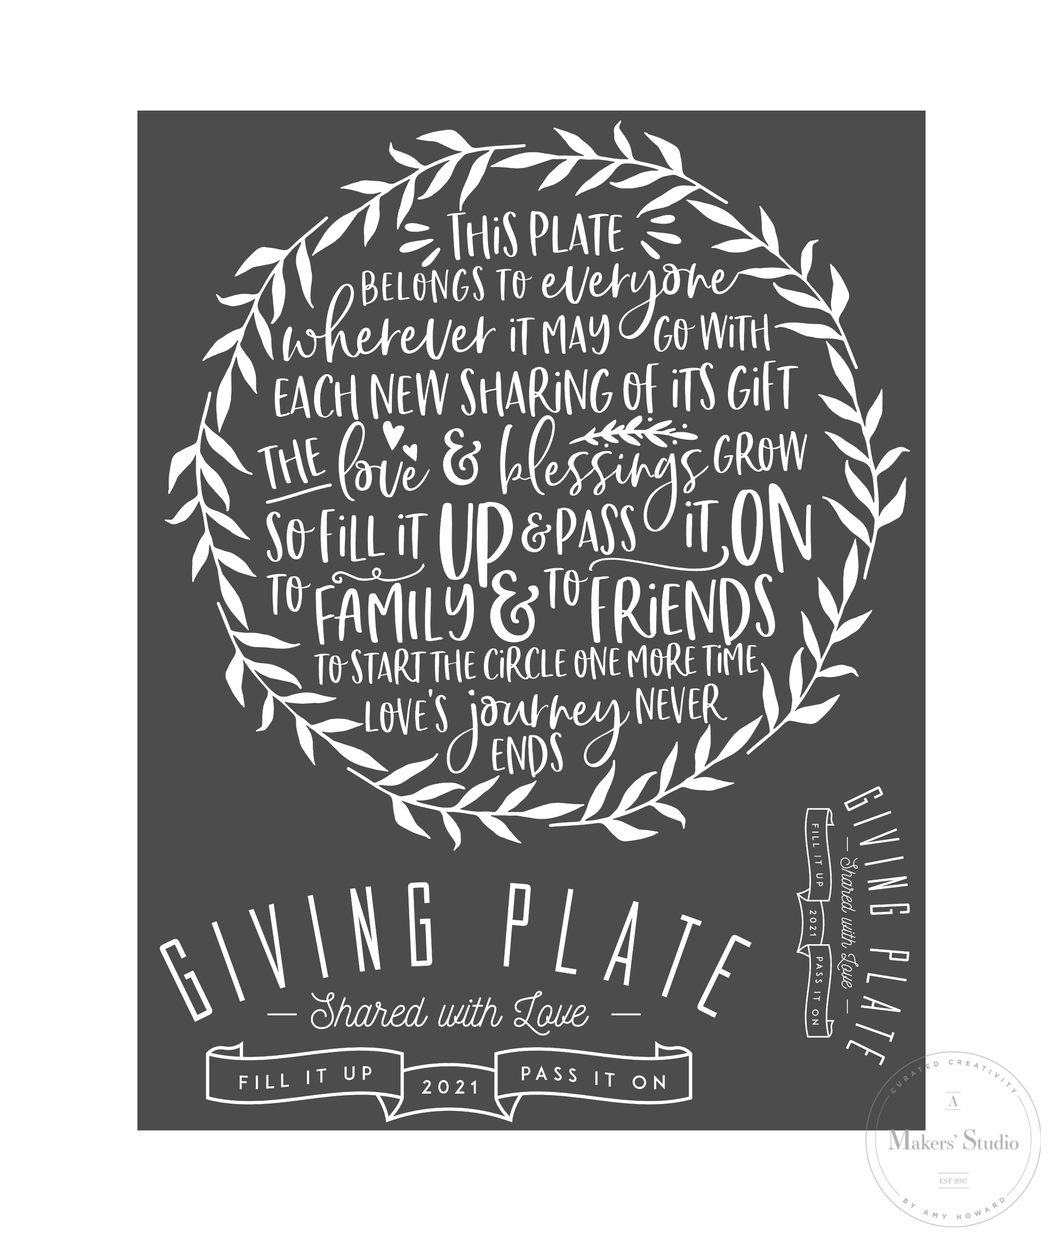 The Giving Plate - Mesh Stencil 8.5x11